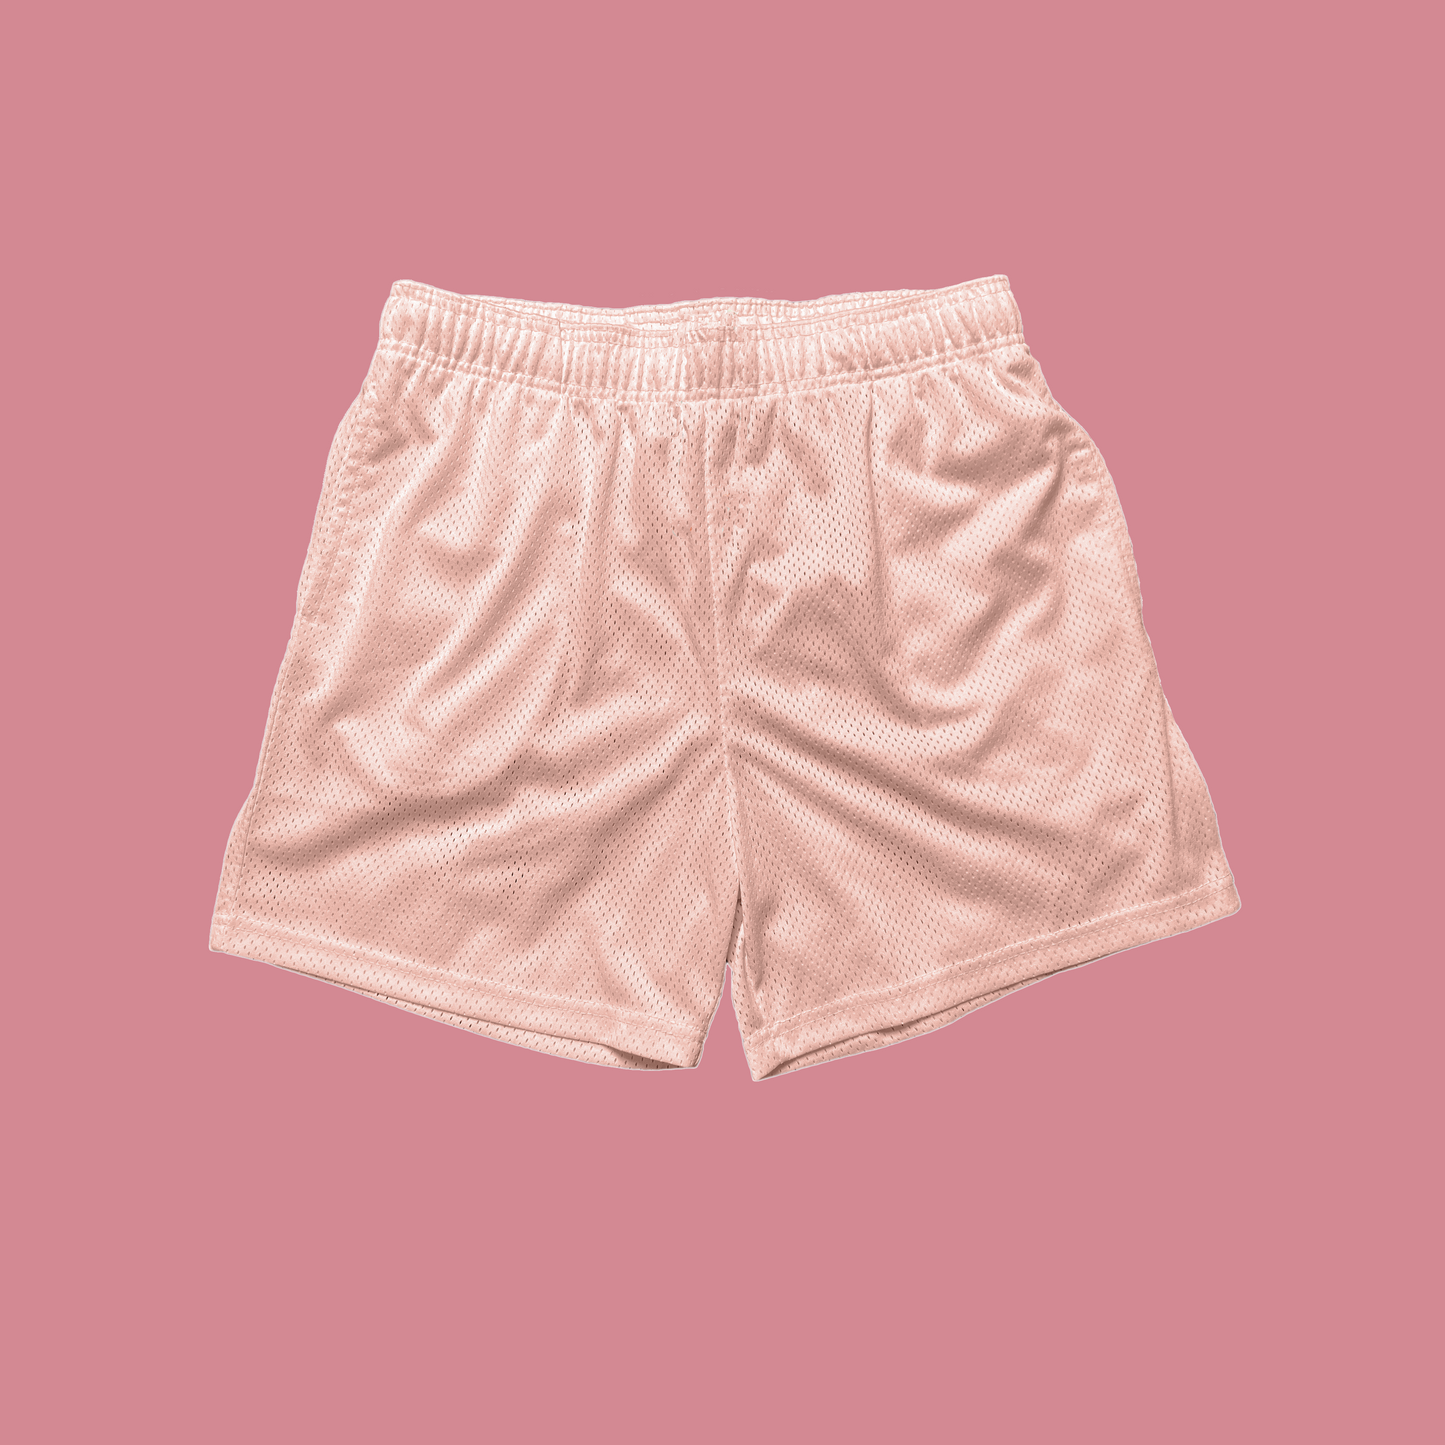 Cherry blossom "Believe" athletic shorts